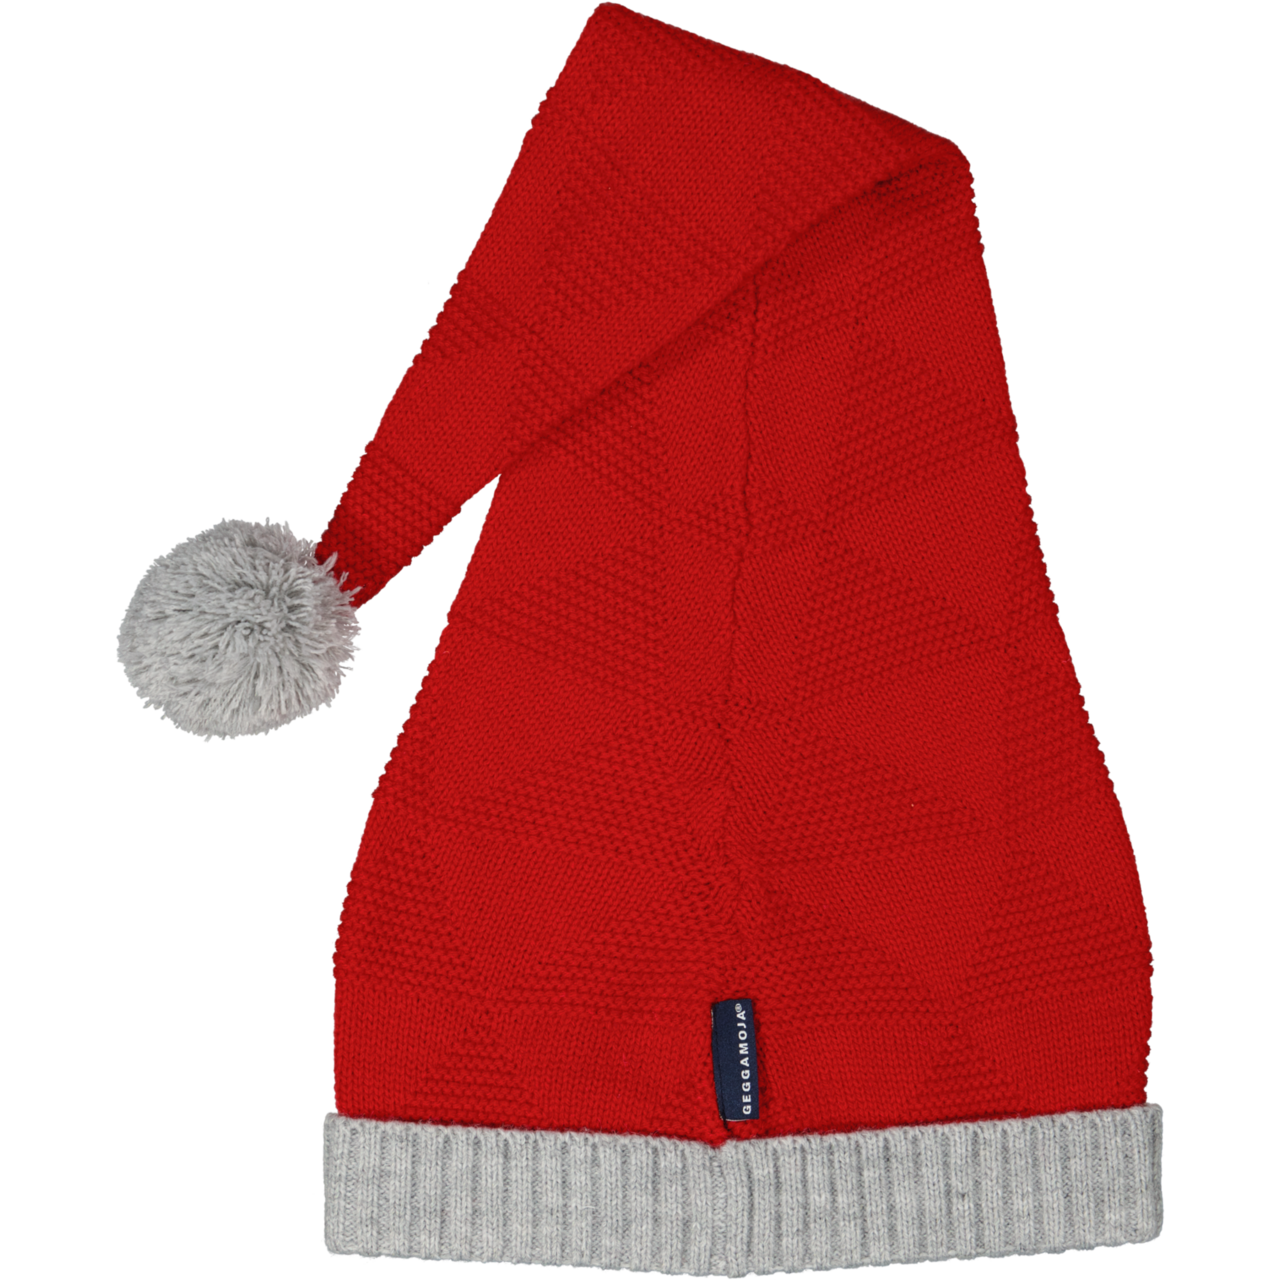 Knitted Christmas hat Red  6Y-Adult